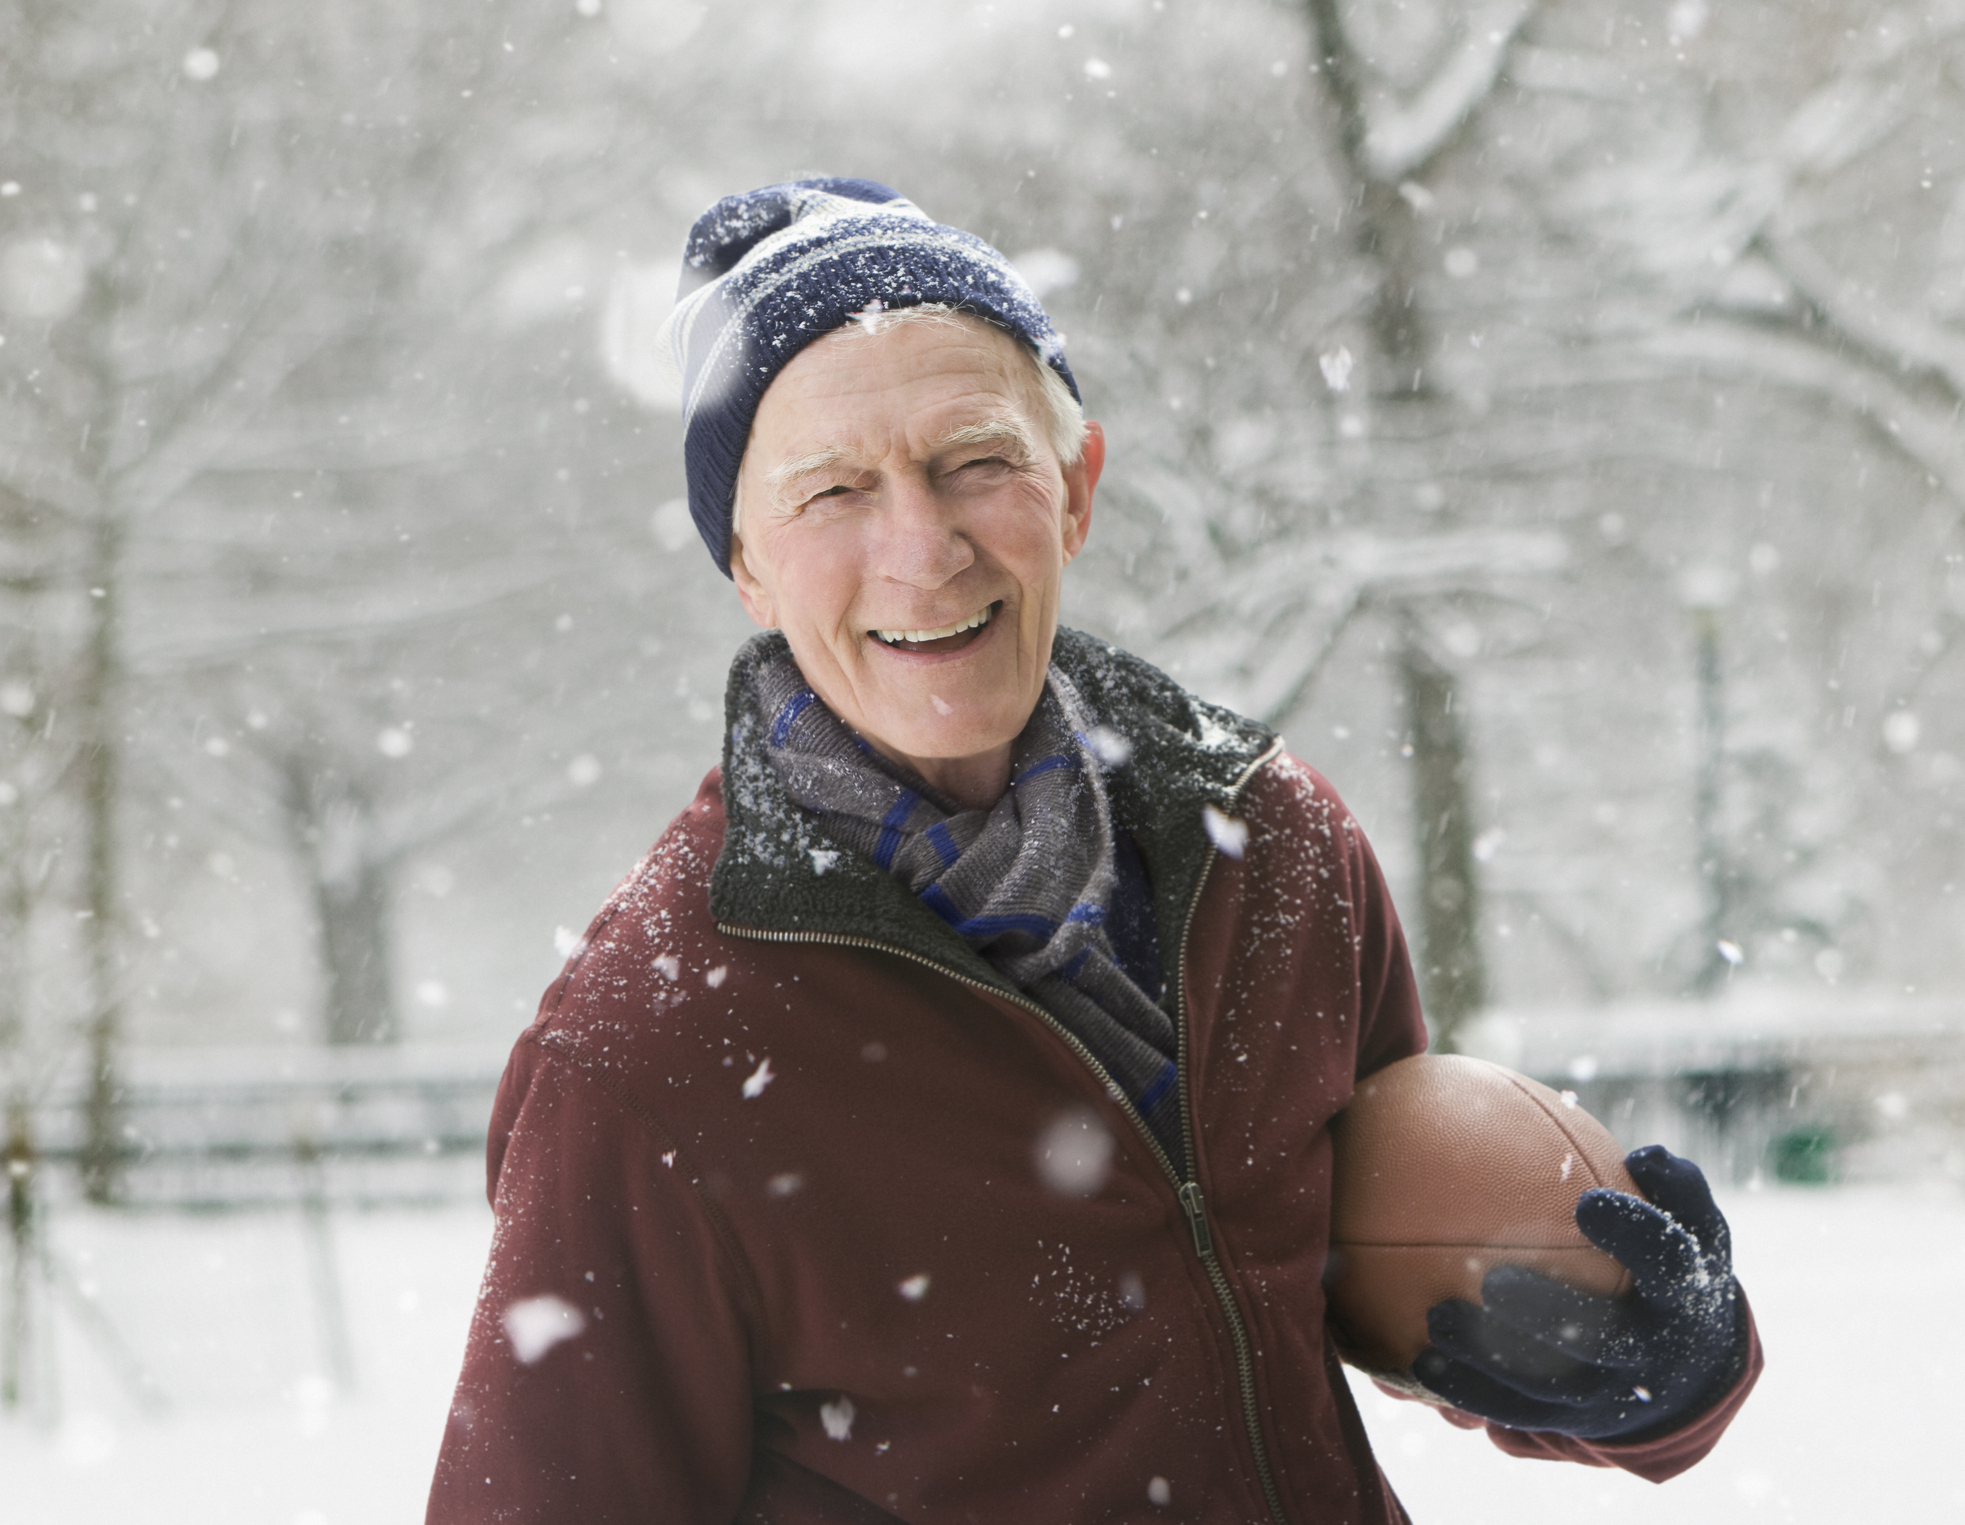 man holding a football in the snow